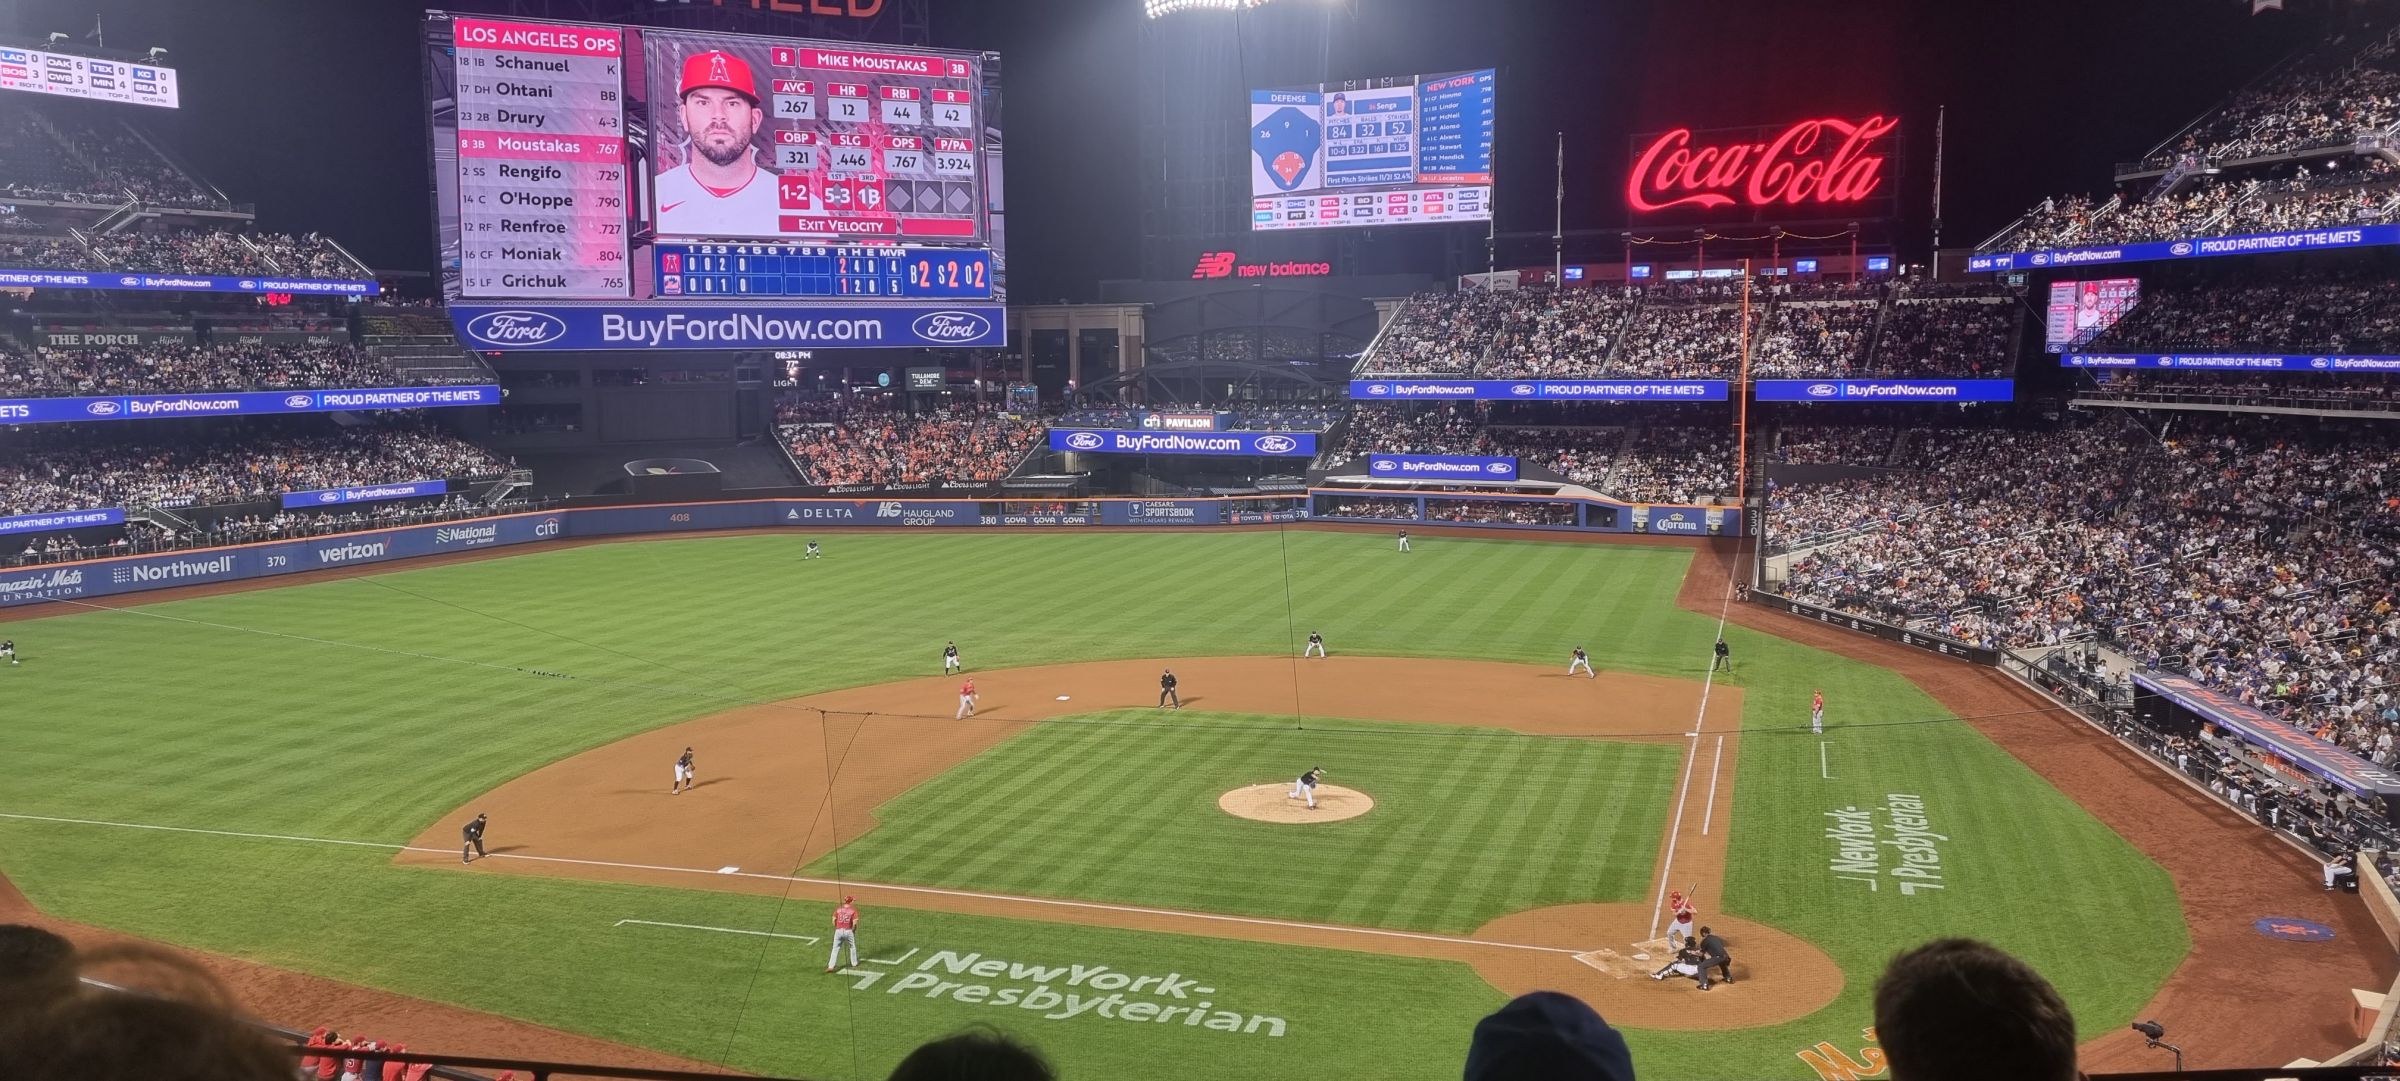 section 323, row 3 seat view  - citi field